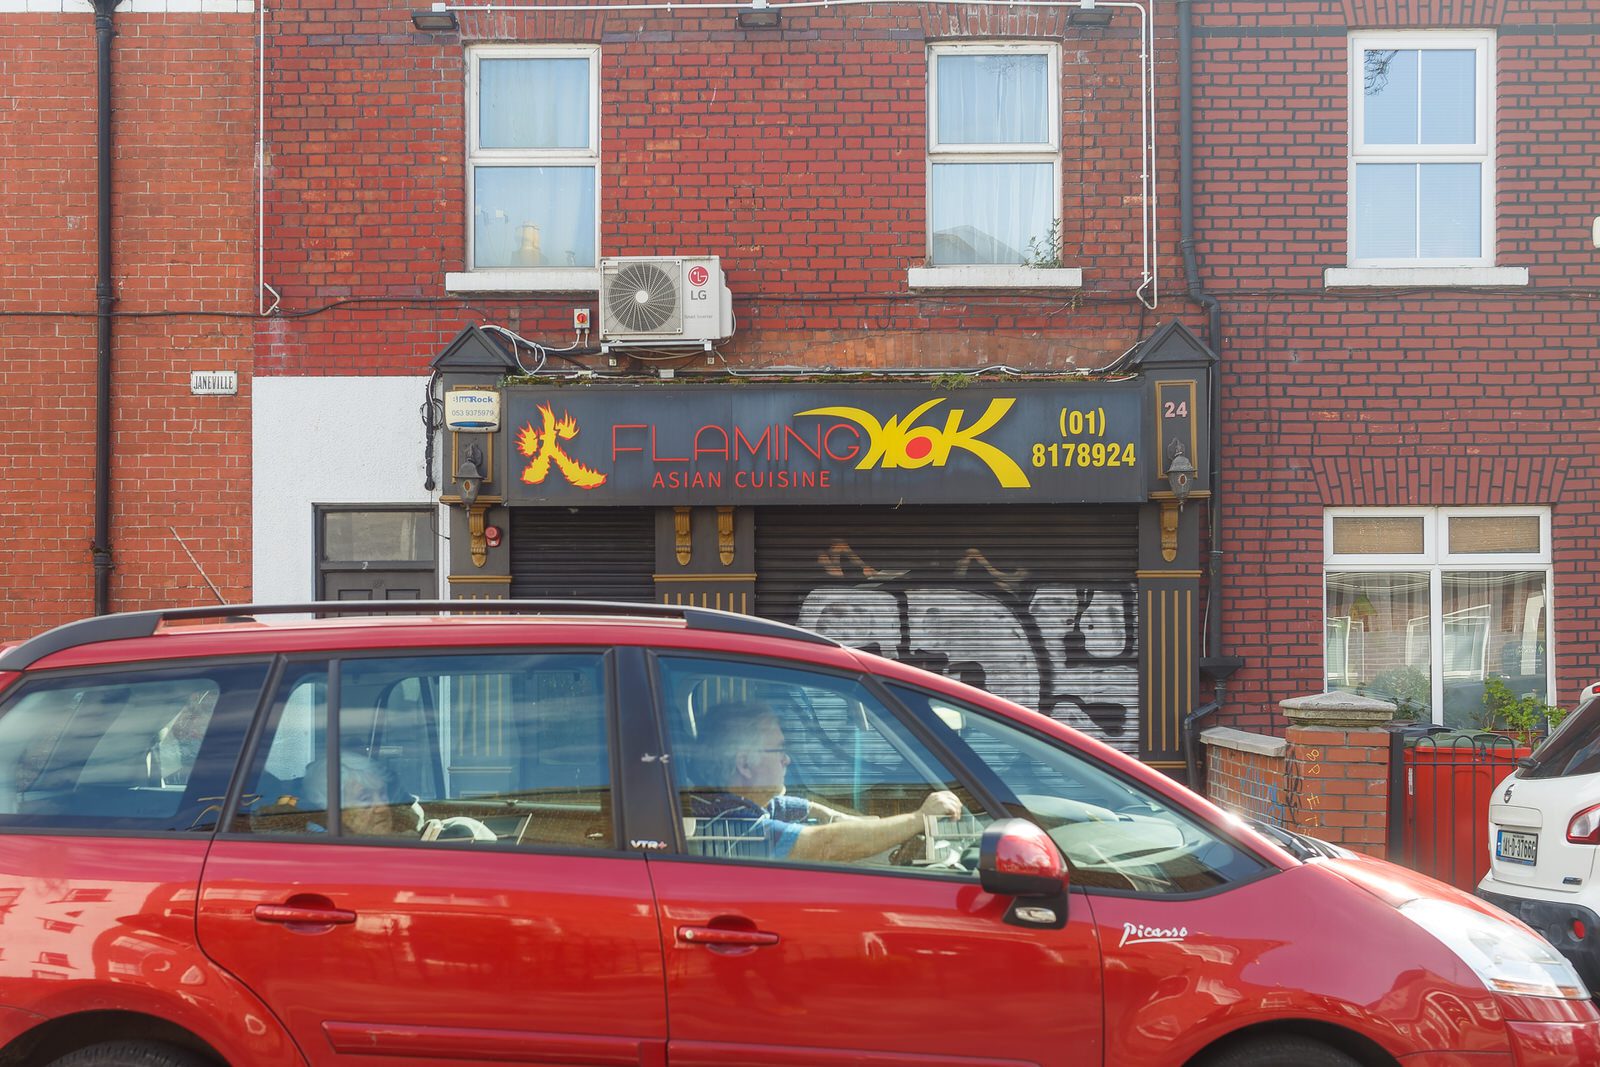 THE FLAMING WOK CHINESE RESTAURANT